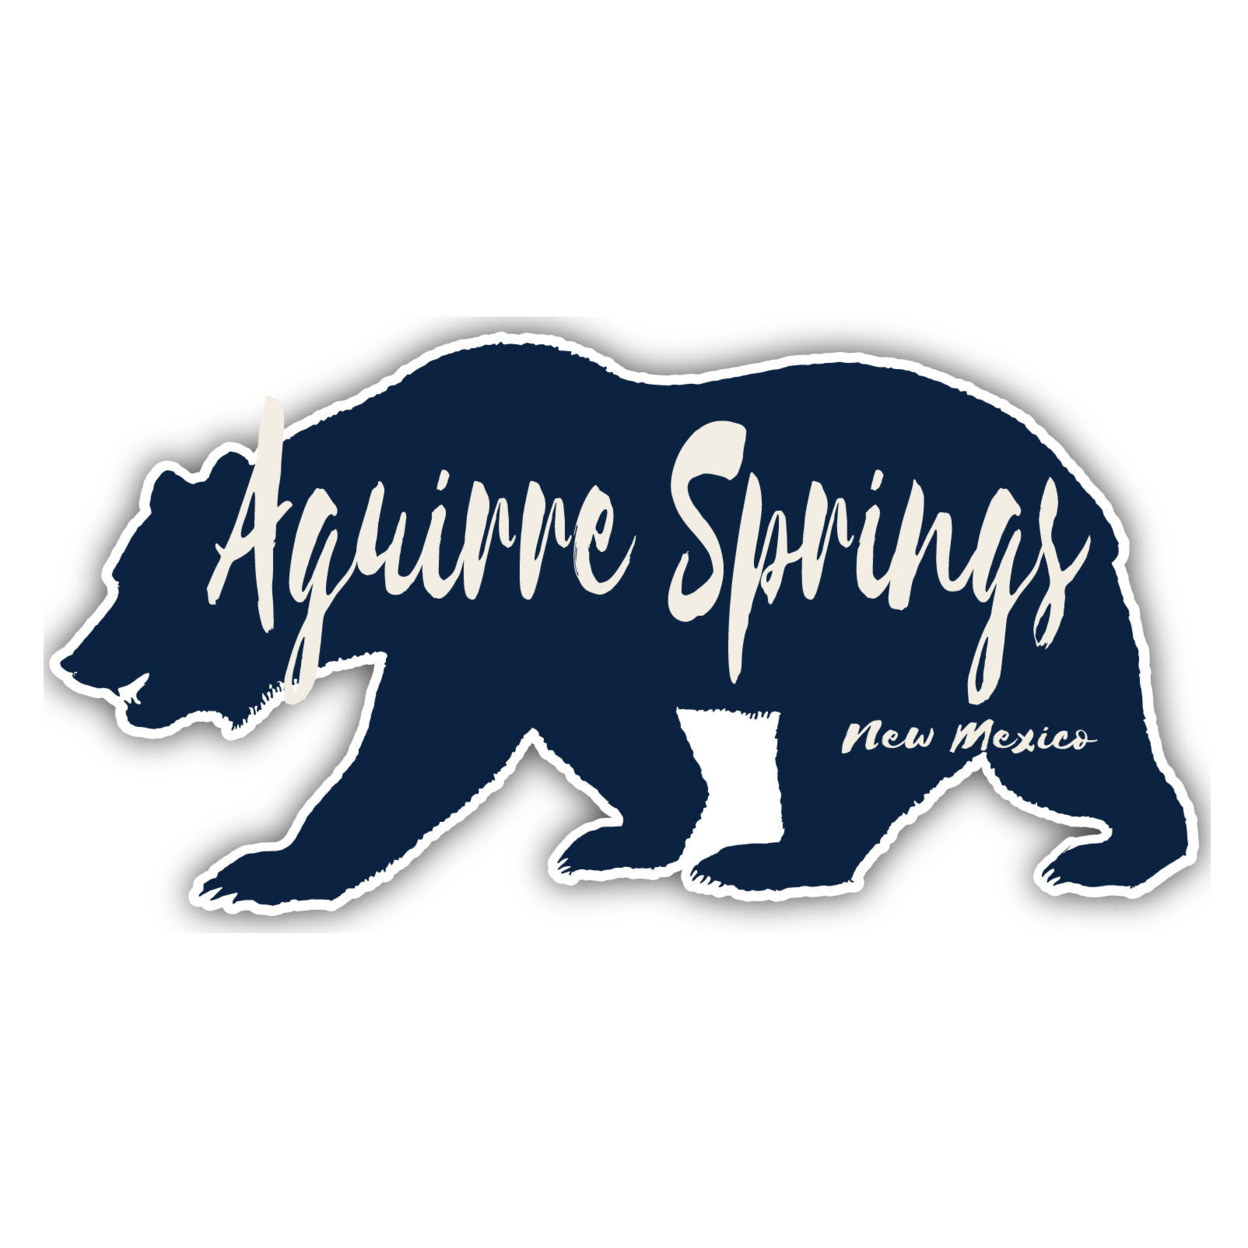 Aguirre Springs New Mexico Souvenir Decorative Stickers (Choose Theme And Size) - Single Unit, 2-Inch, Bear